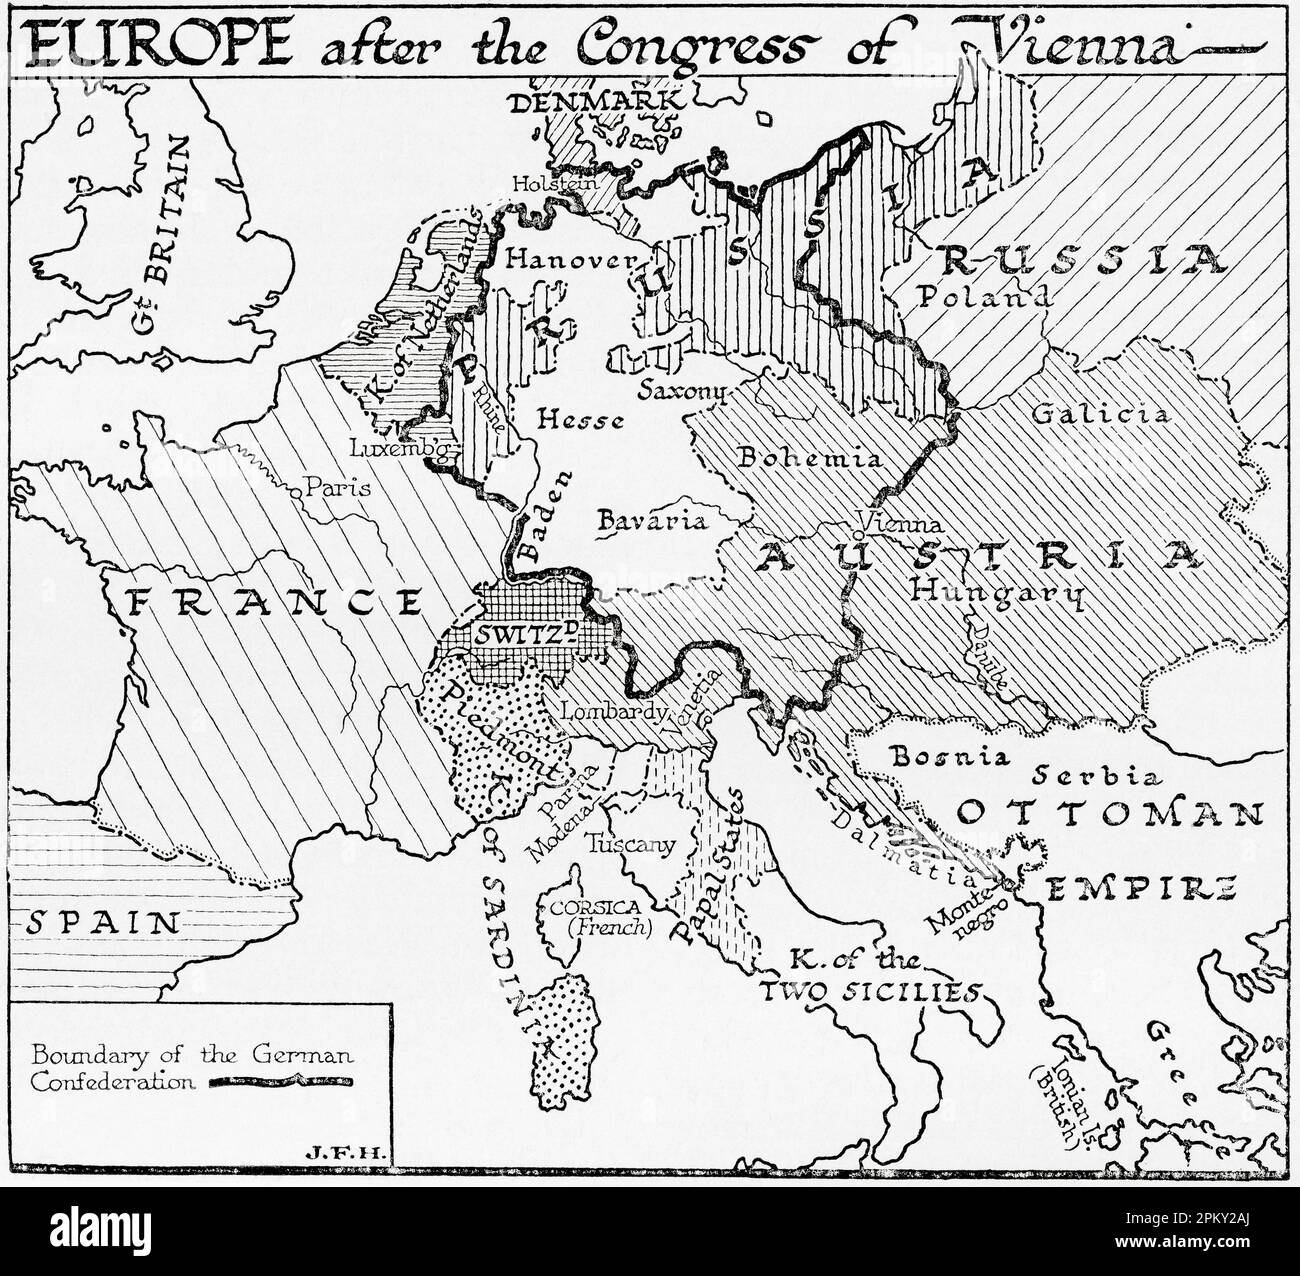 Map of Europe after the Congress of Vienna, 1814-1815.  From the book Outline of History by H.G. Wells, published 1920. Stock Photo